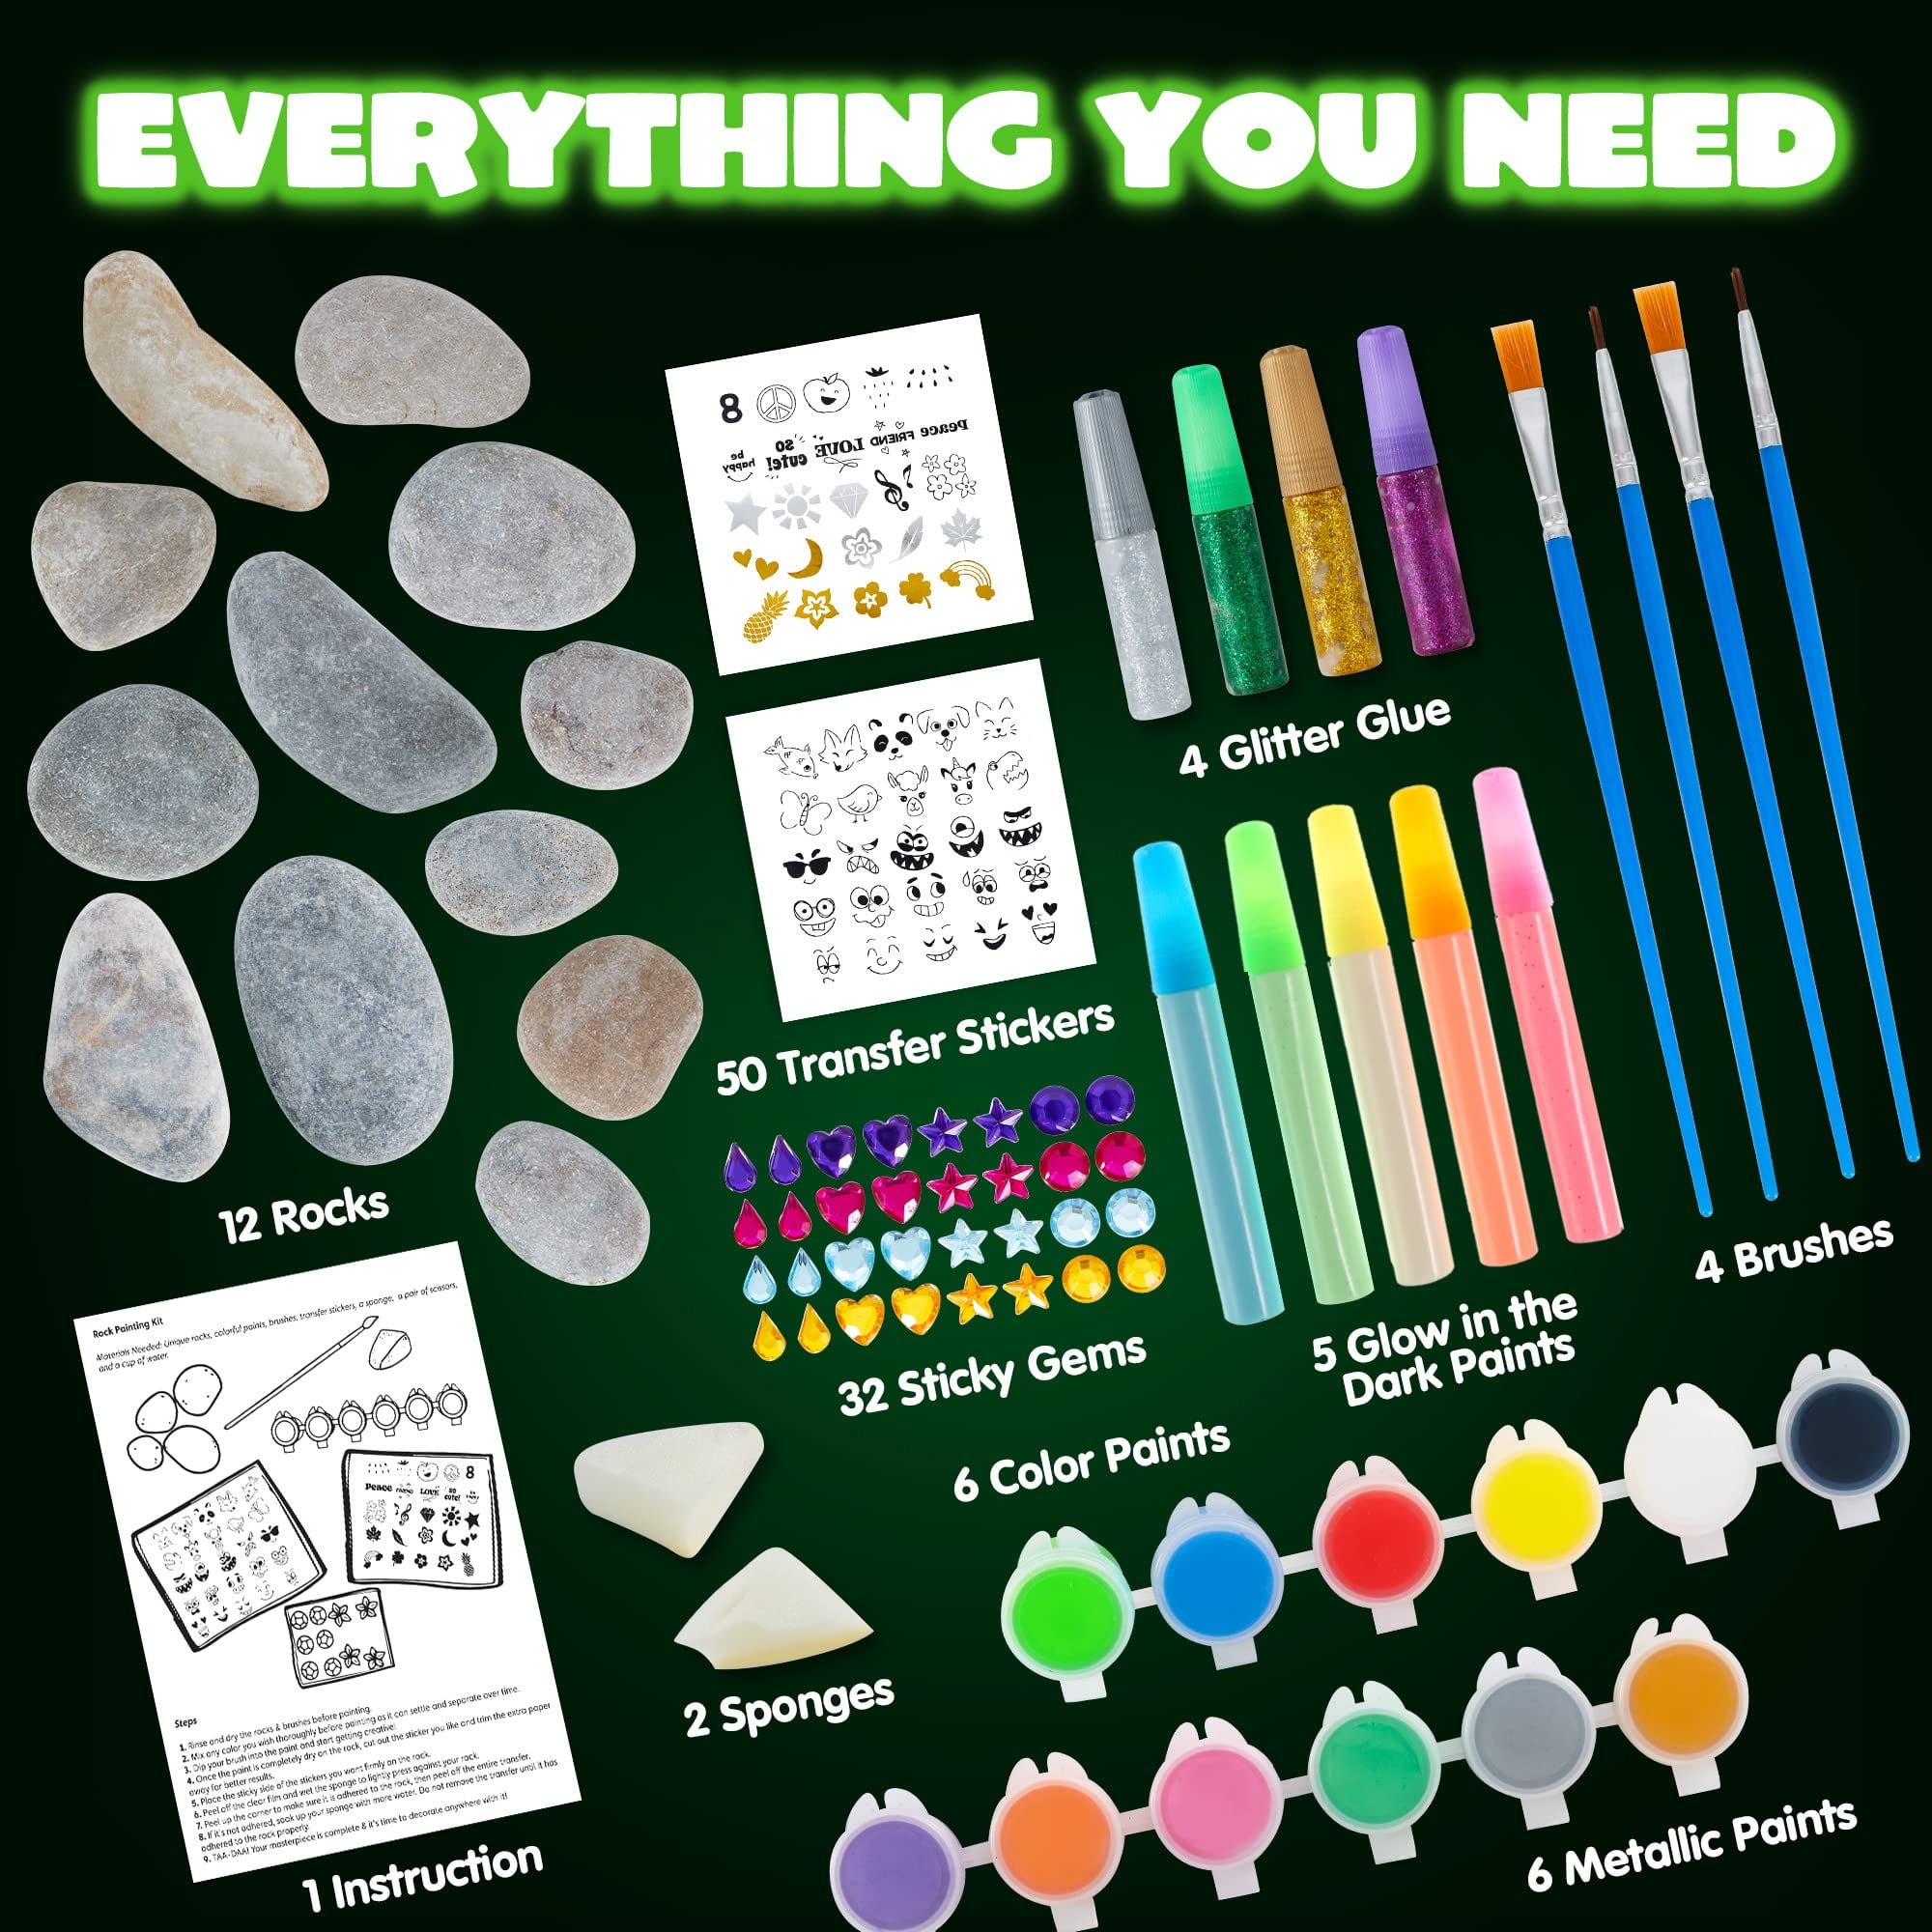  JOYIN 12 Rock Painting Kit, Arts and Crafts Gifts for Boys and  Girls Ages 4-12, DIY Art Supplies, Craft Activities Kits, Kid Toys for 4+,  Family Creative Activity, Toddler Birthday Gifts